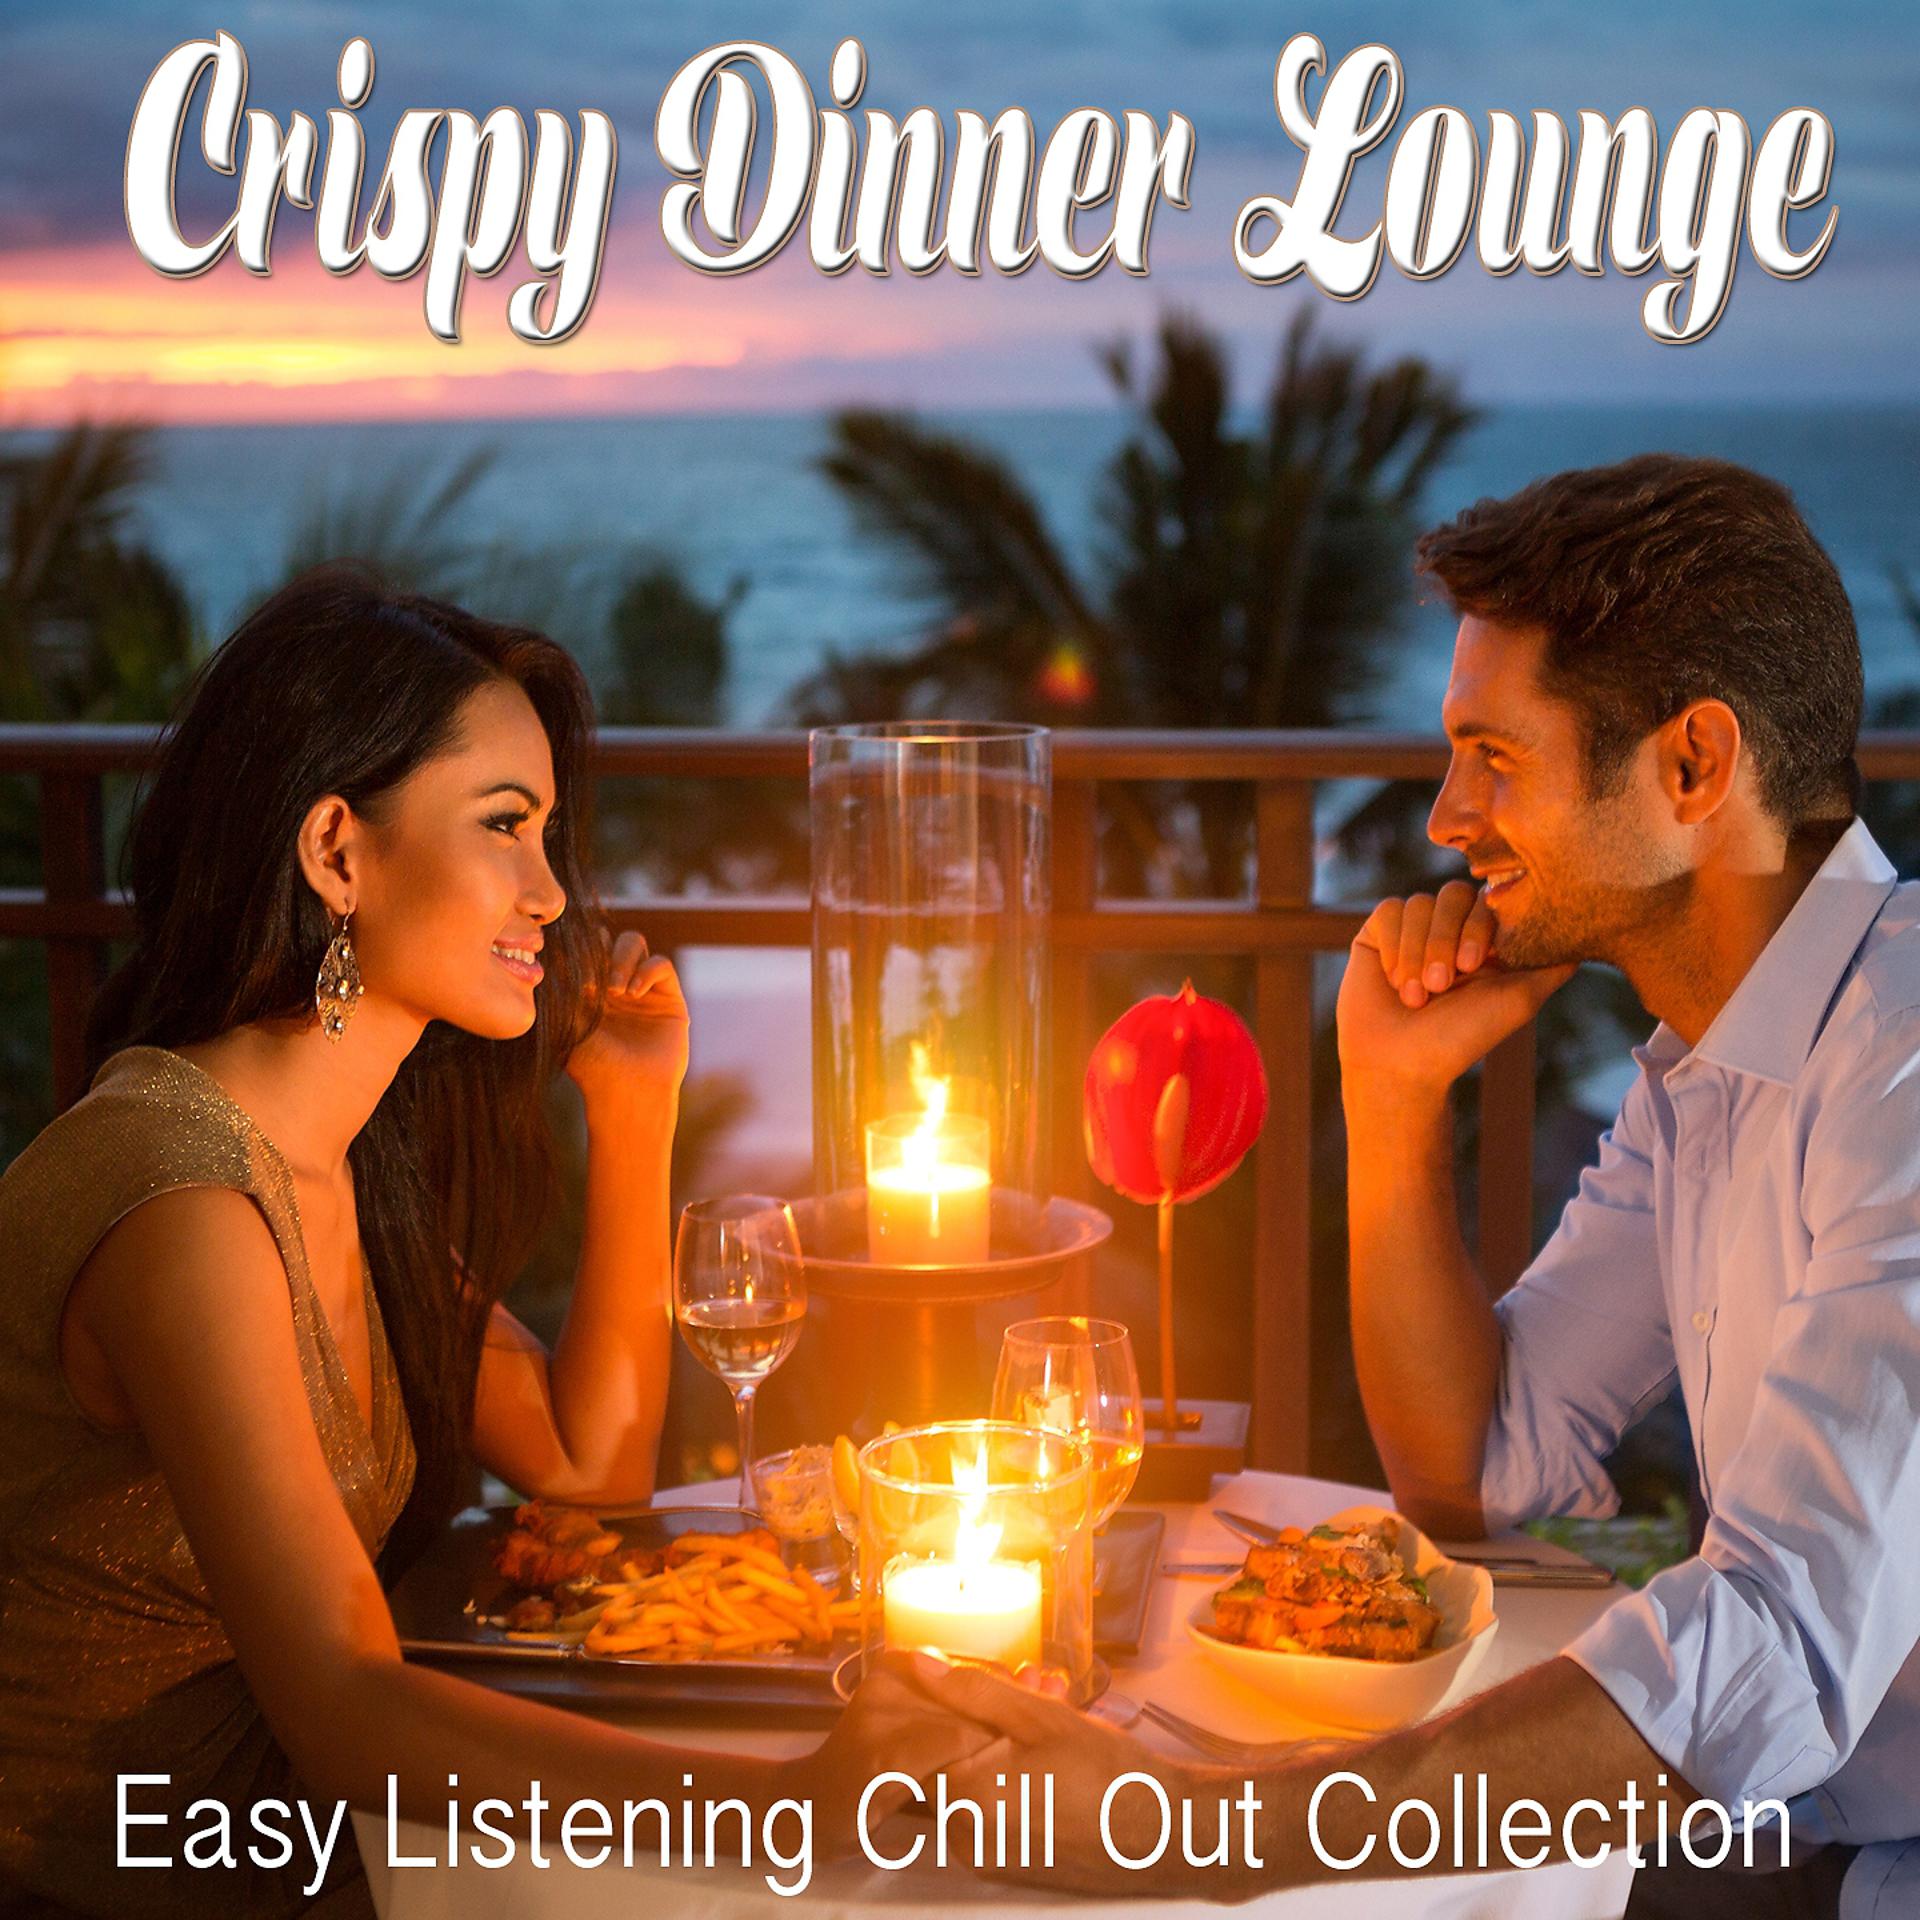 Постер альбома Crispy Dinner Lounge - Easy Listening Chill Out Collection